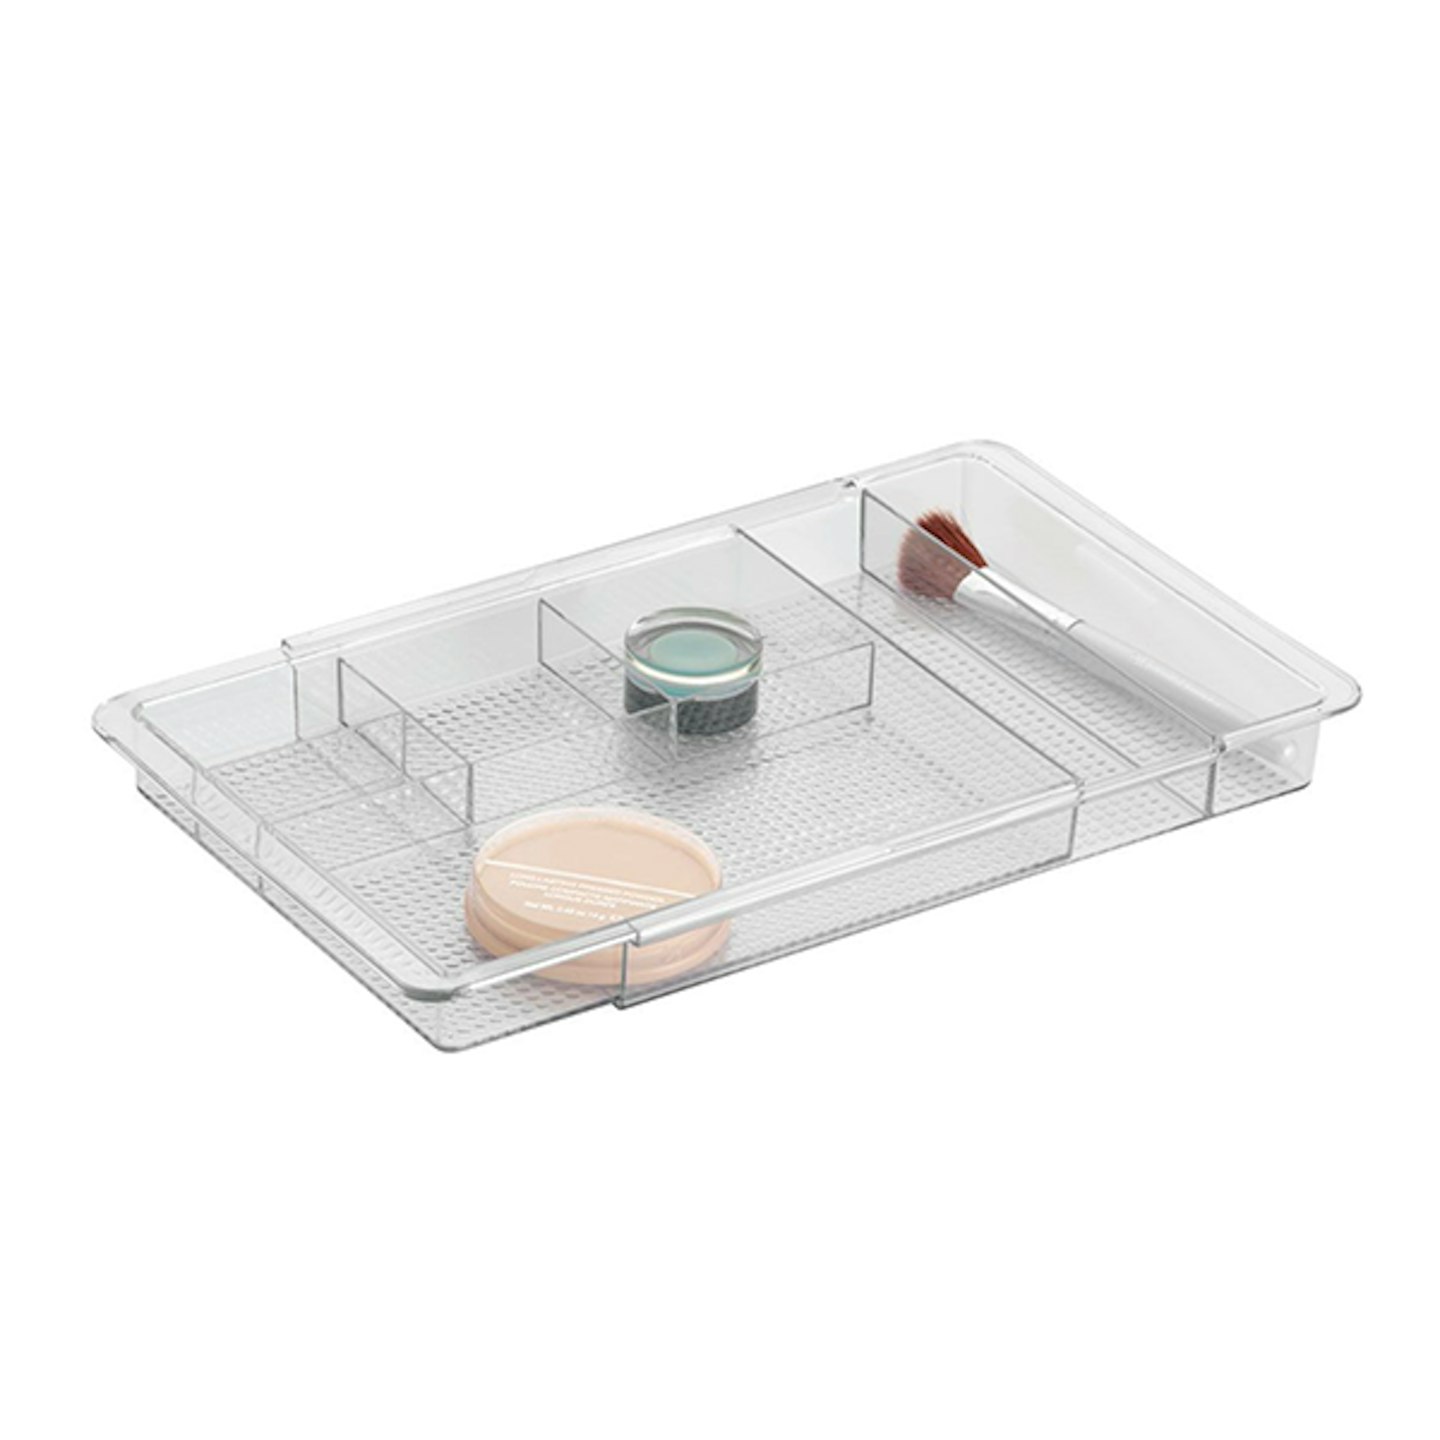 The Holding Company InterDesign Expandable Drawer Organiser